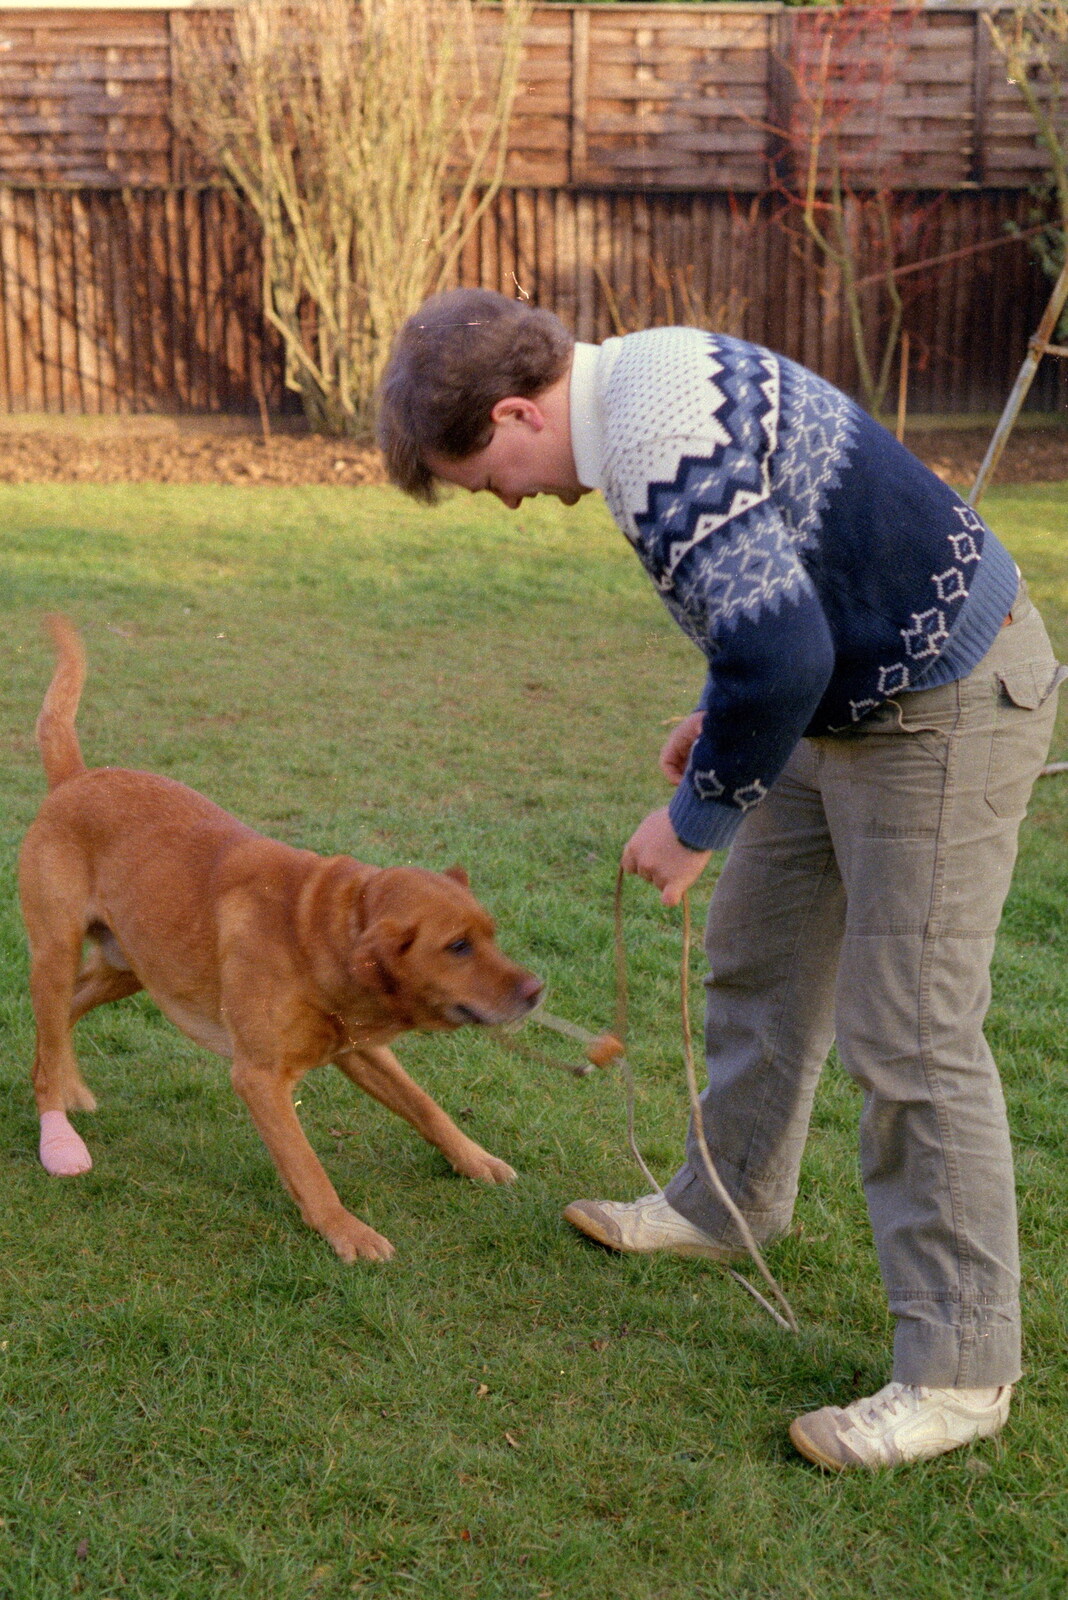 Hamish messes around with Geordie the dog from Uni: The End of Term and Whitsand Bay, Plymouth and New Milton - 21st March 1986